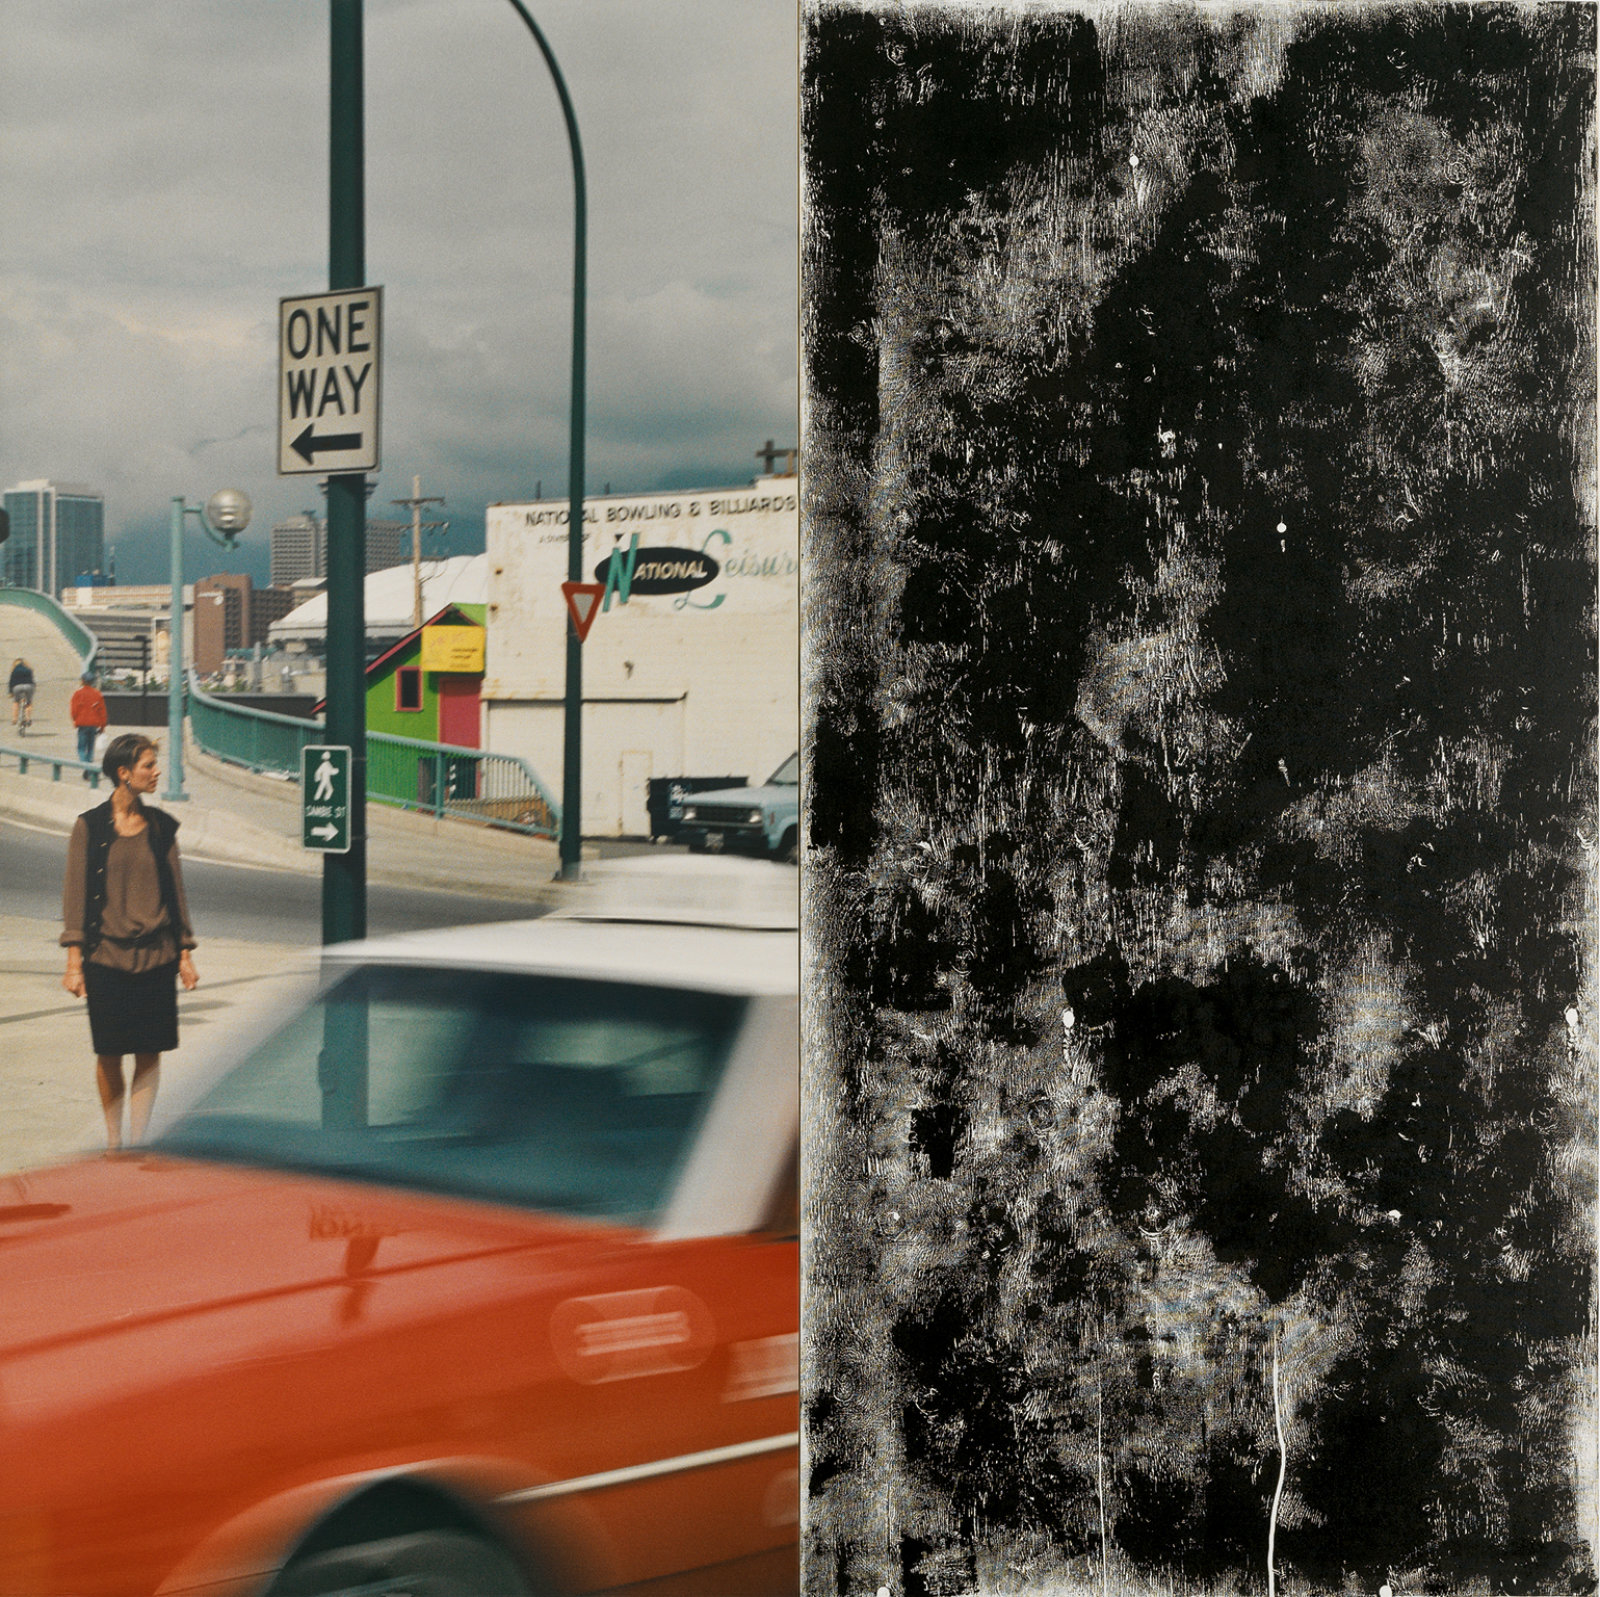 Ian Wallace, Untitled (In the Street I), 1988, photolaminate with acrylic and ink monoprint on canvas, diptych, 96 x 96 in. (244 x 244 cm). Installation view, A Literature of Images, Kunsthalle Zürich, 2008